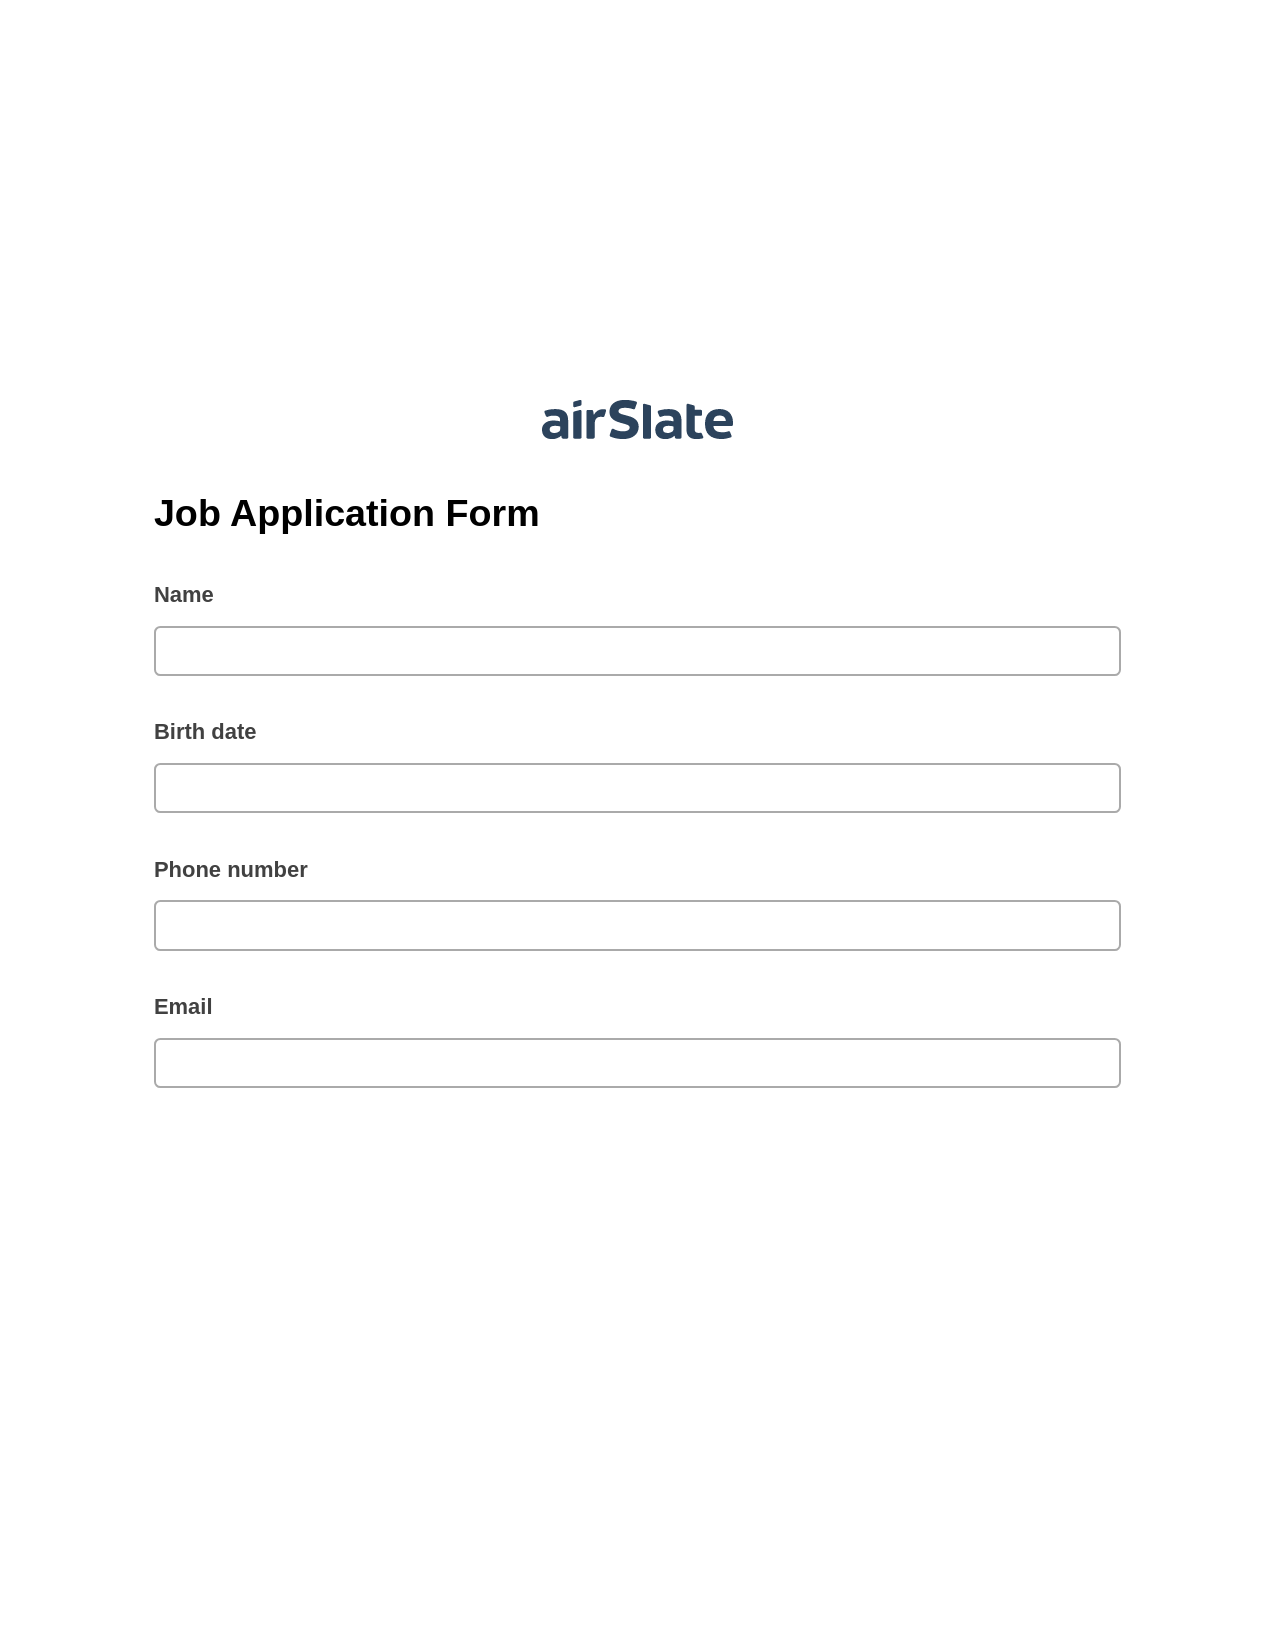 Job Application Form Pre-fill from NetSuite Records Bot, SendGrid send Campaign bot, OneDrive Bot